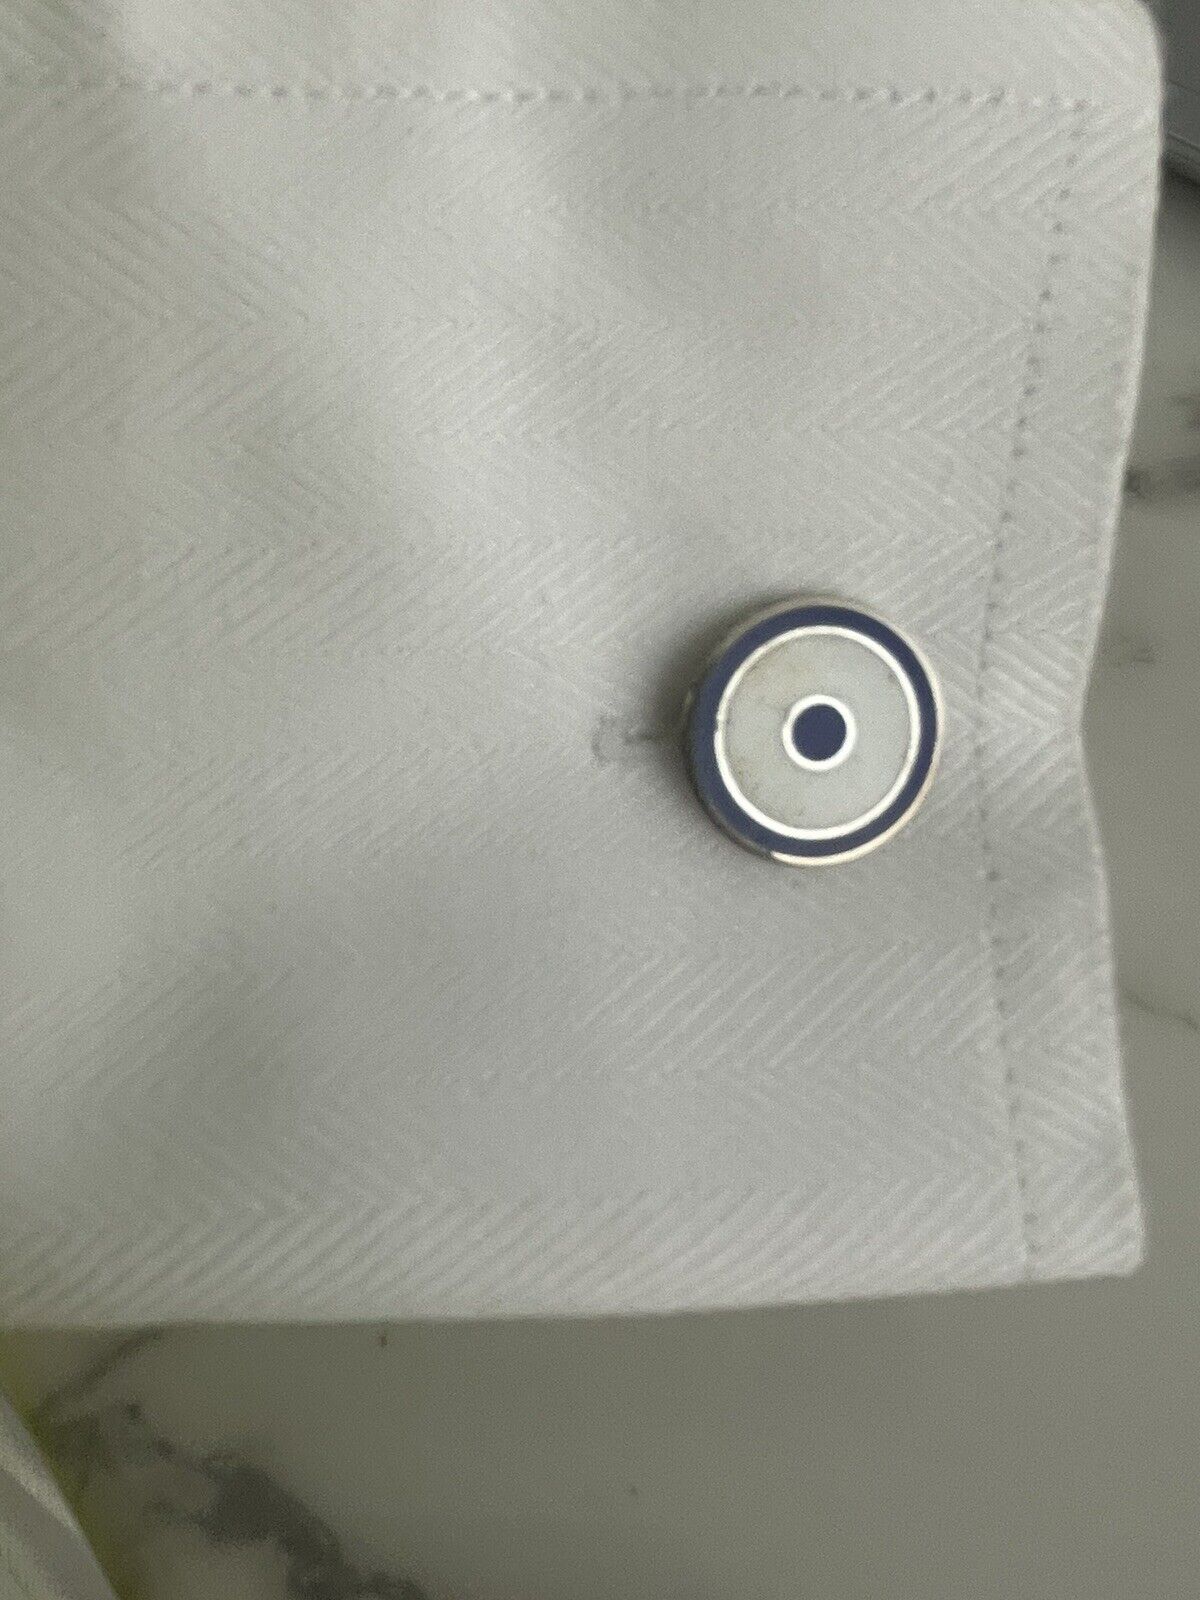 Vintage sterling silver and enamel Blue and white Bullseye cufflinks